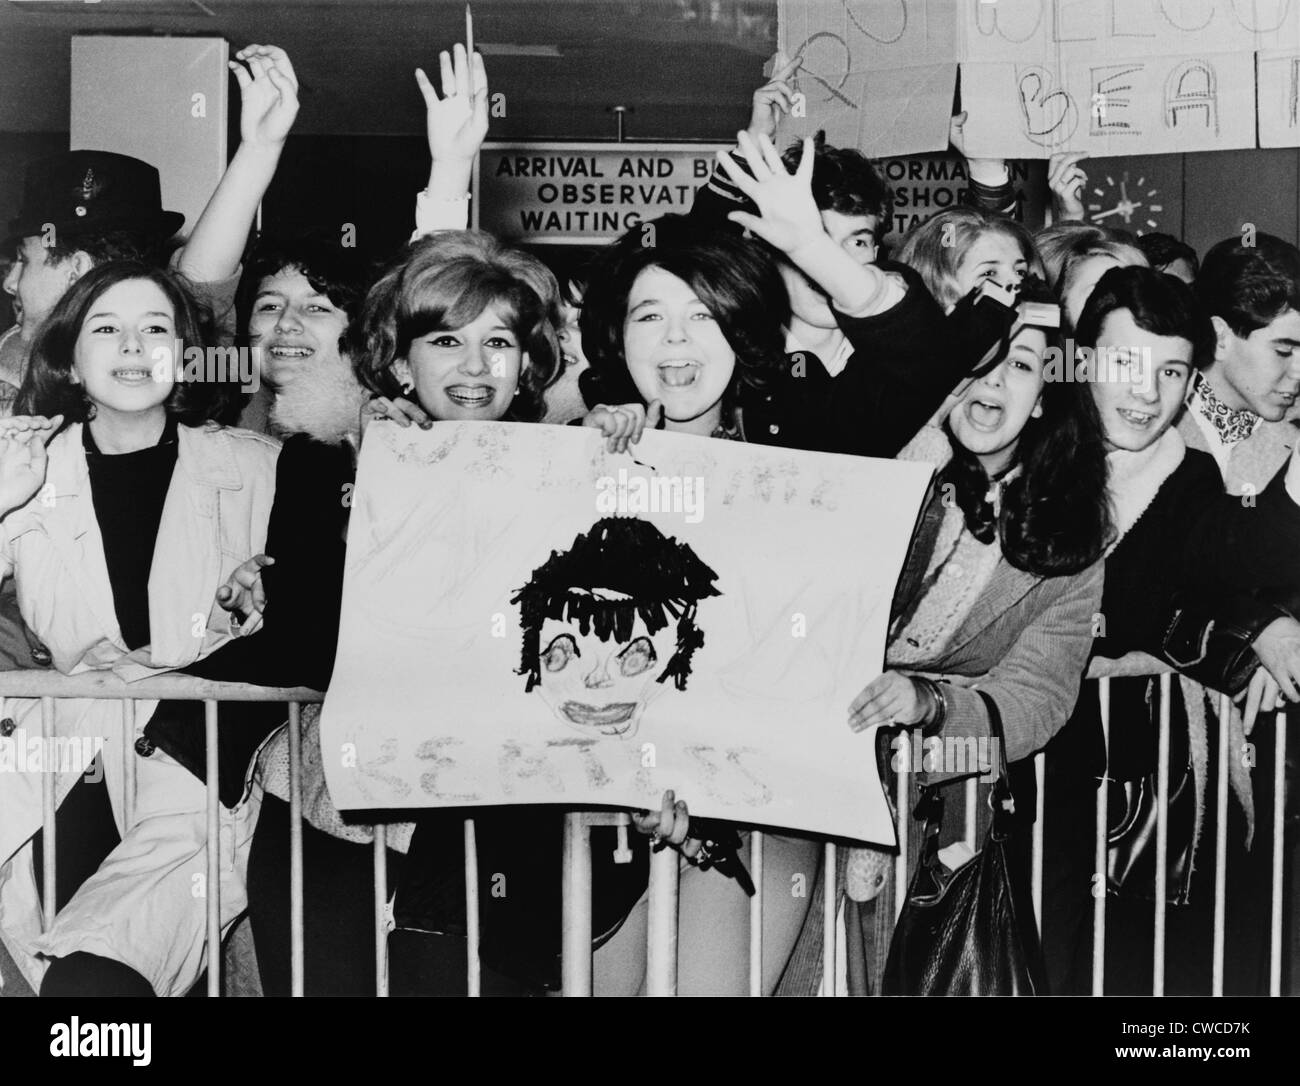 Screaming teenagers girls wave a crude sign as they welcome 'The Beatles' at New York's Kennedy Airport. Feb. 7, 1964. Stock Photo